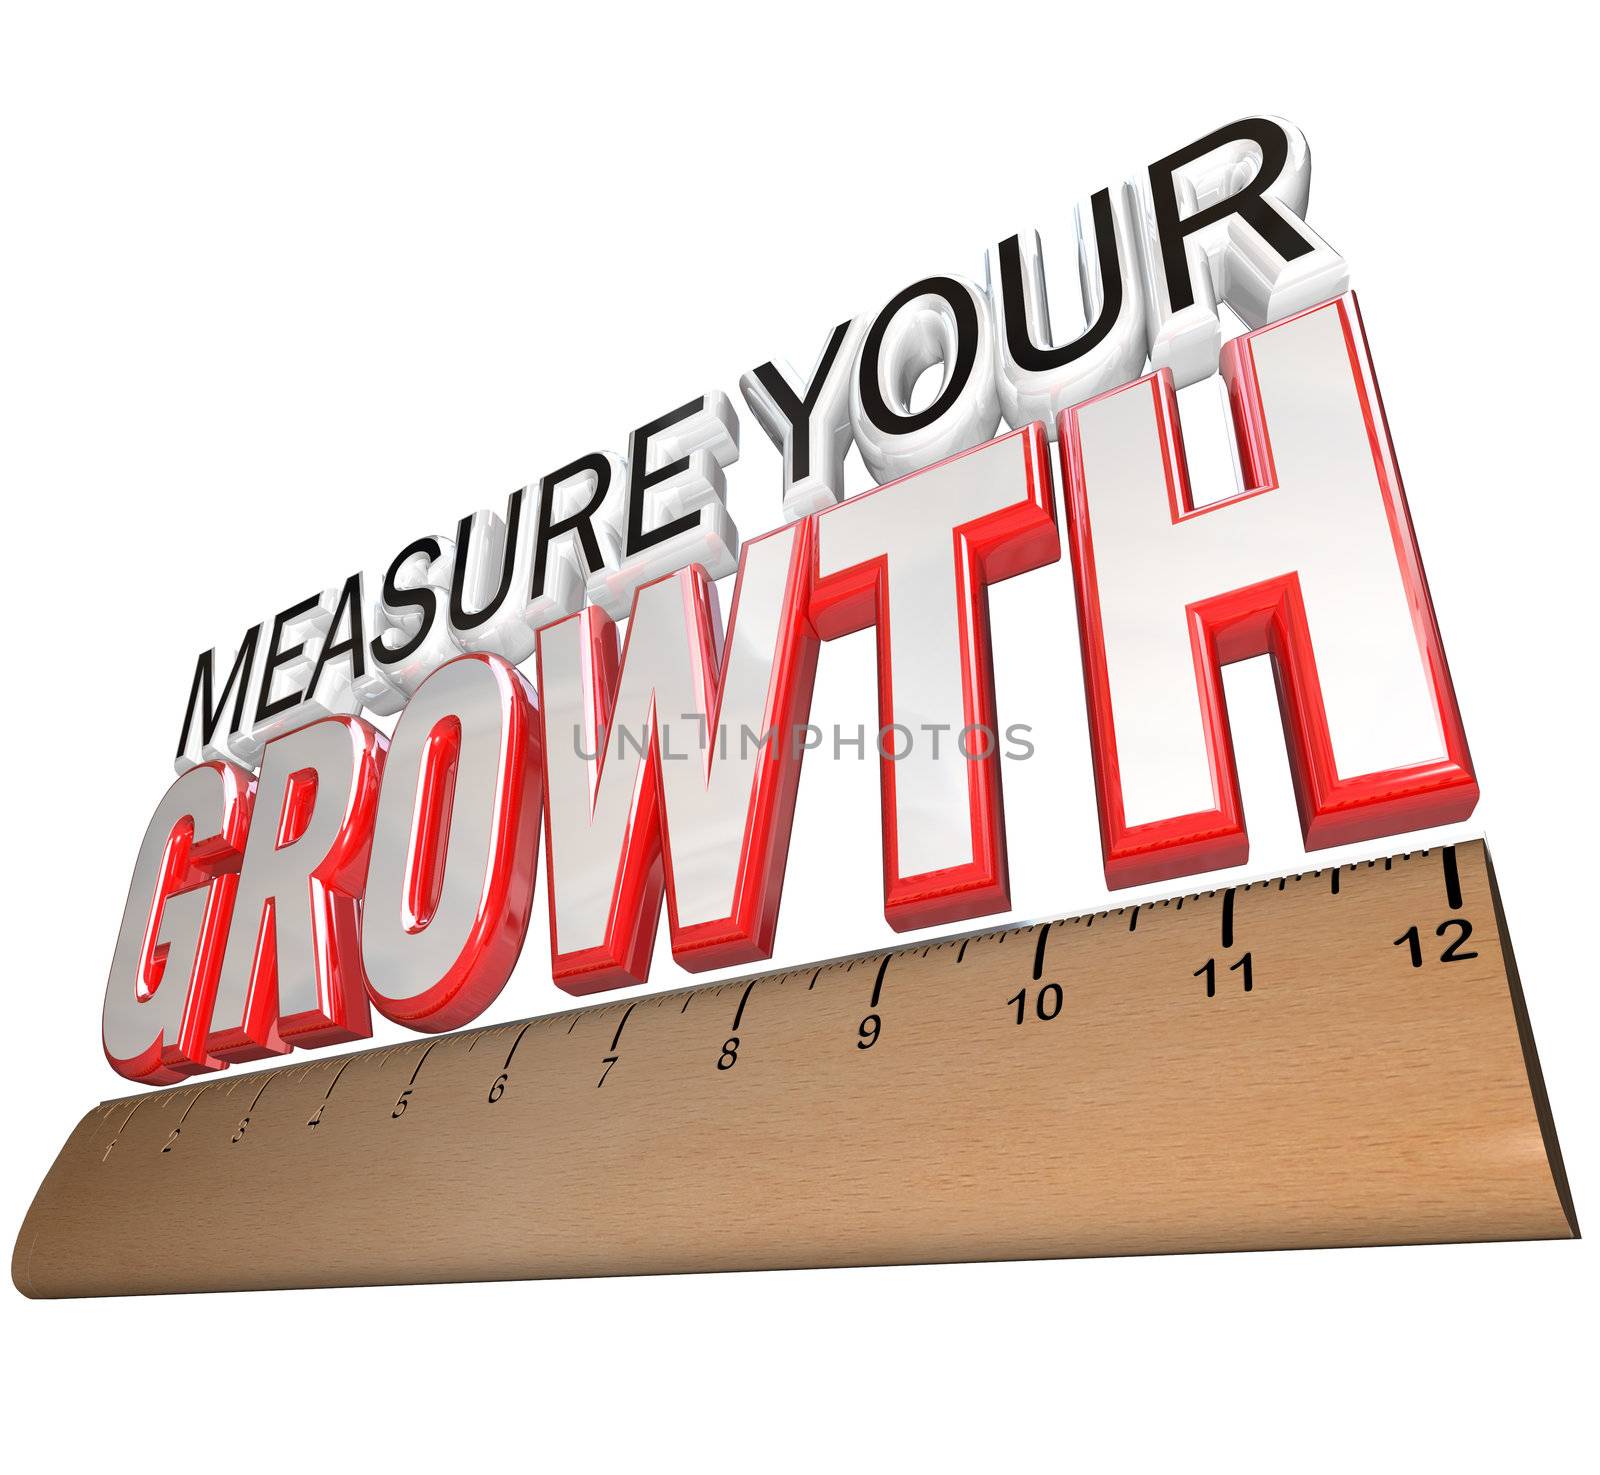 A ruler measuring the words Measure Your Growth, illustrating the importance of tracking your progress and determining if you have achieved your goals